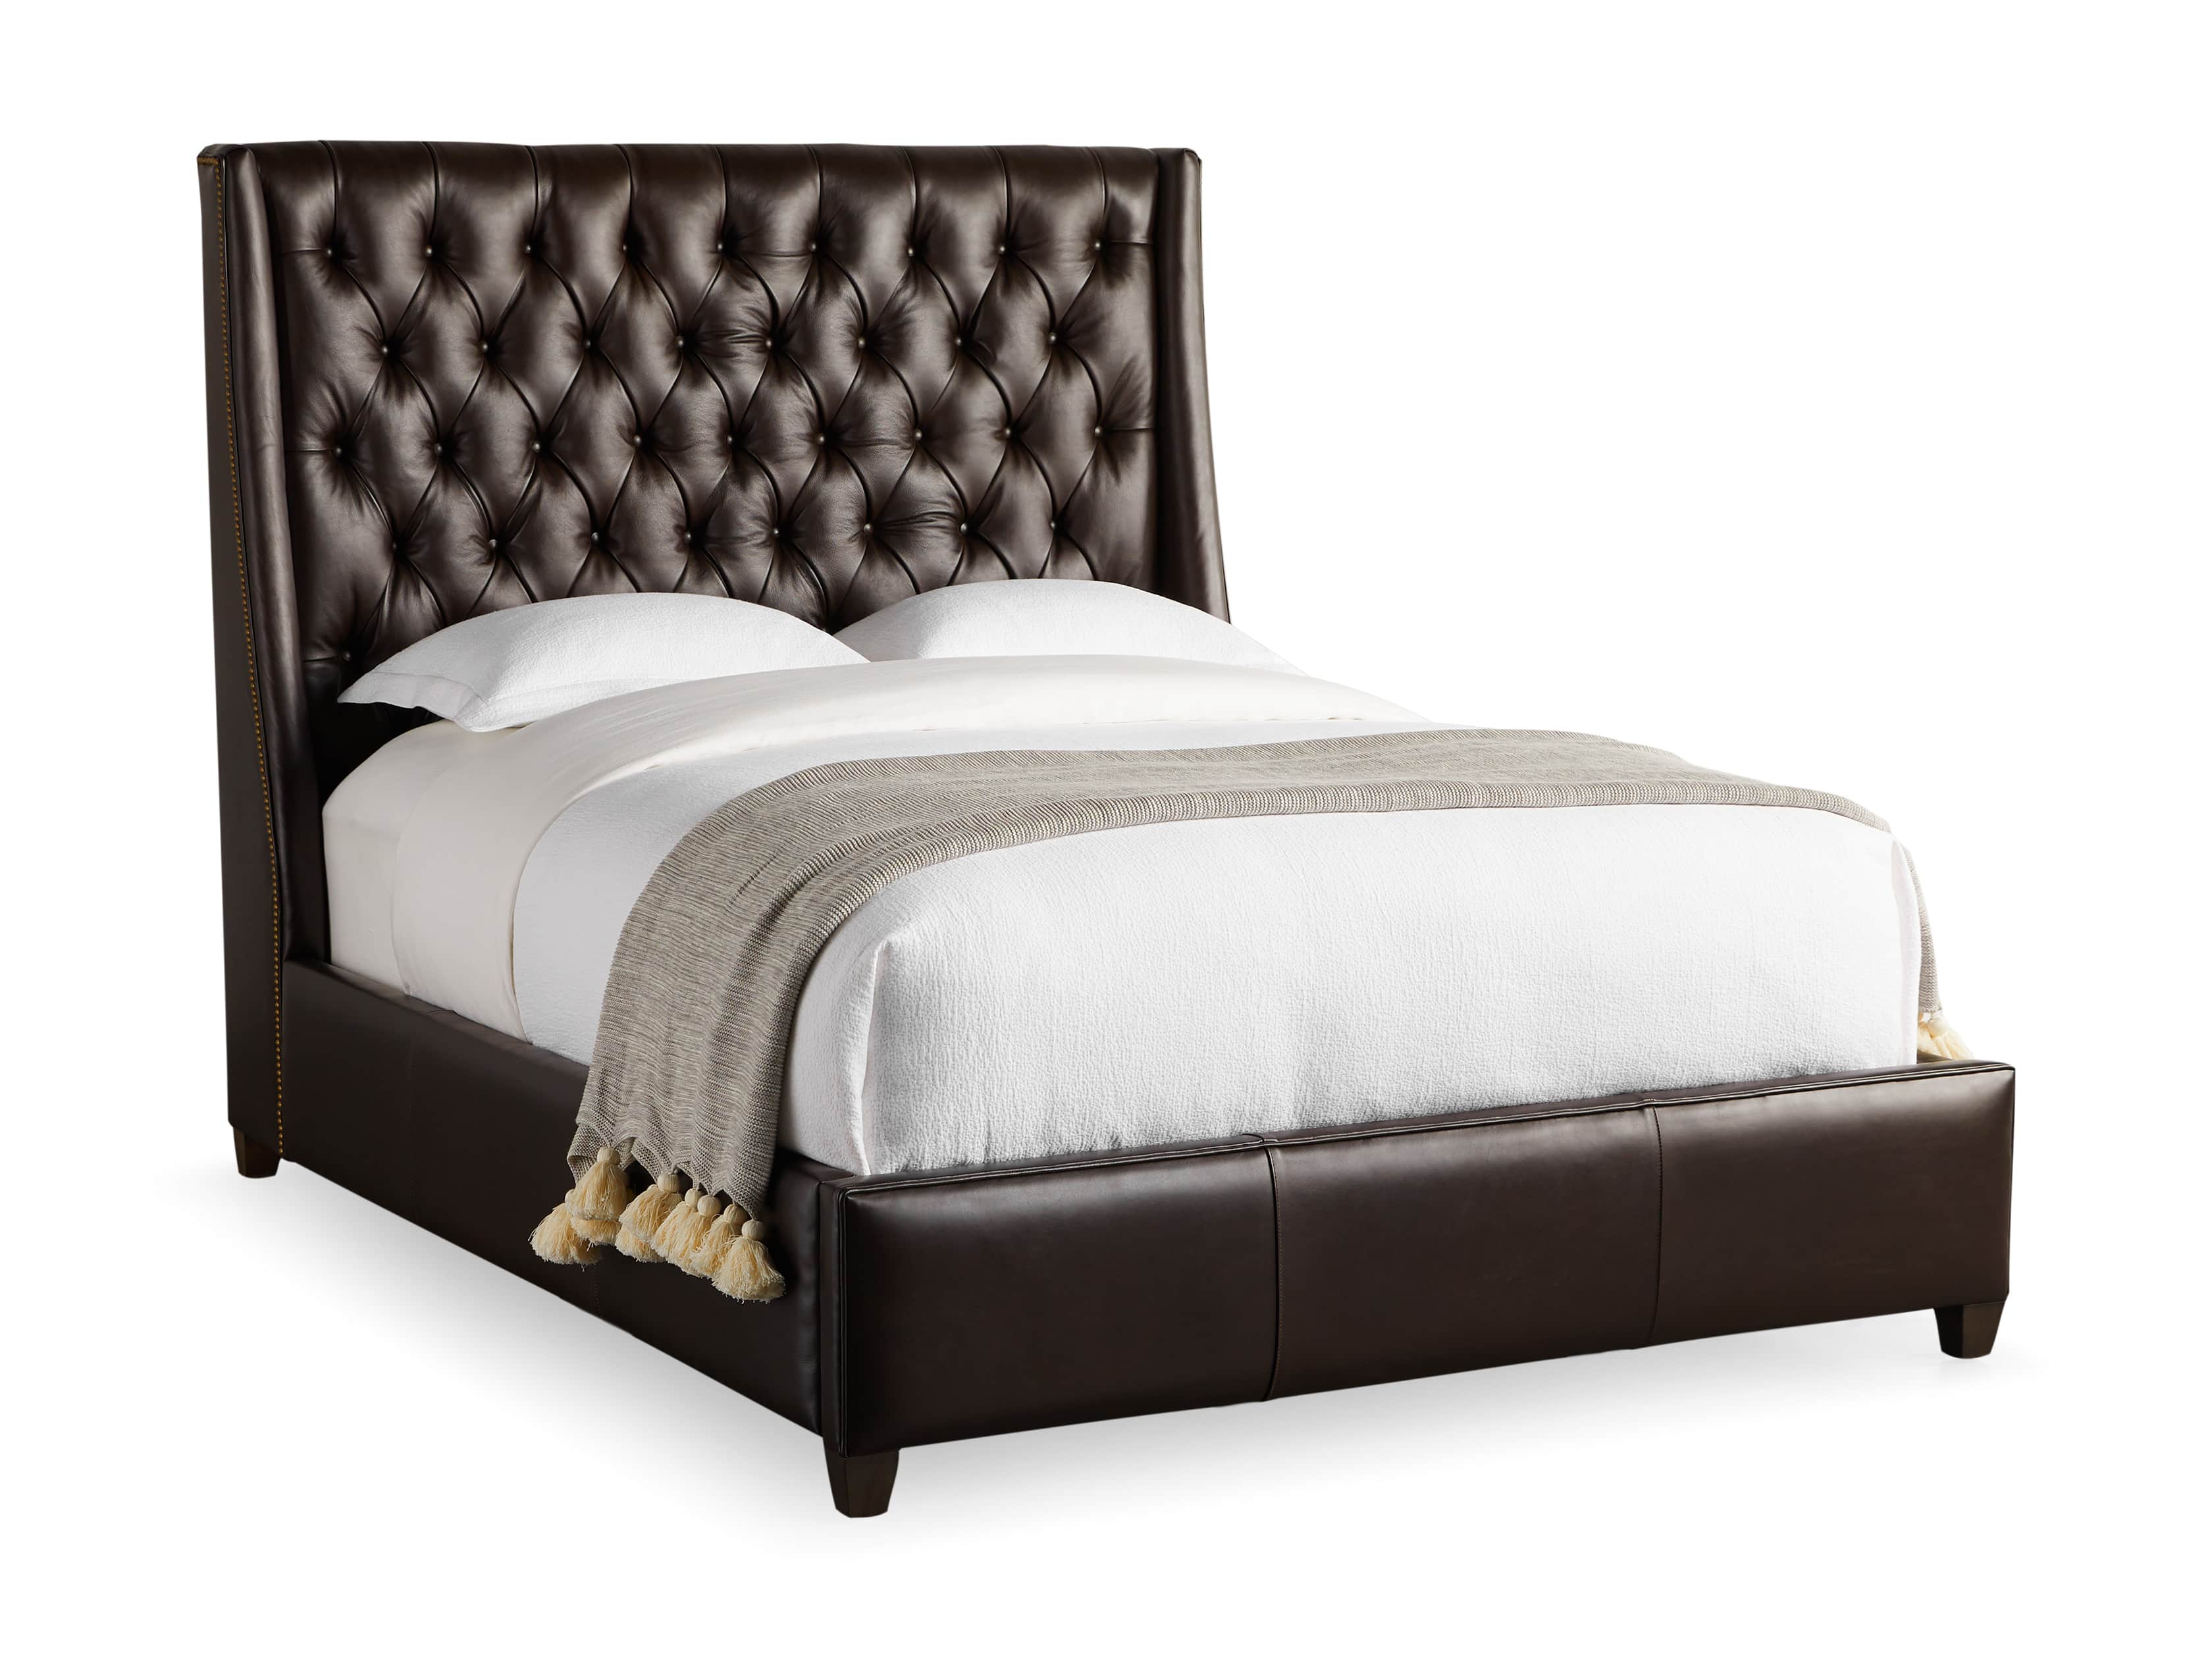 Devereaux Leather Tufted Bed Arhaus, White Leather Tufted Bed Frame